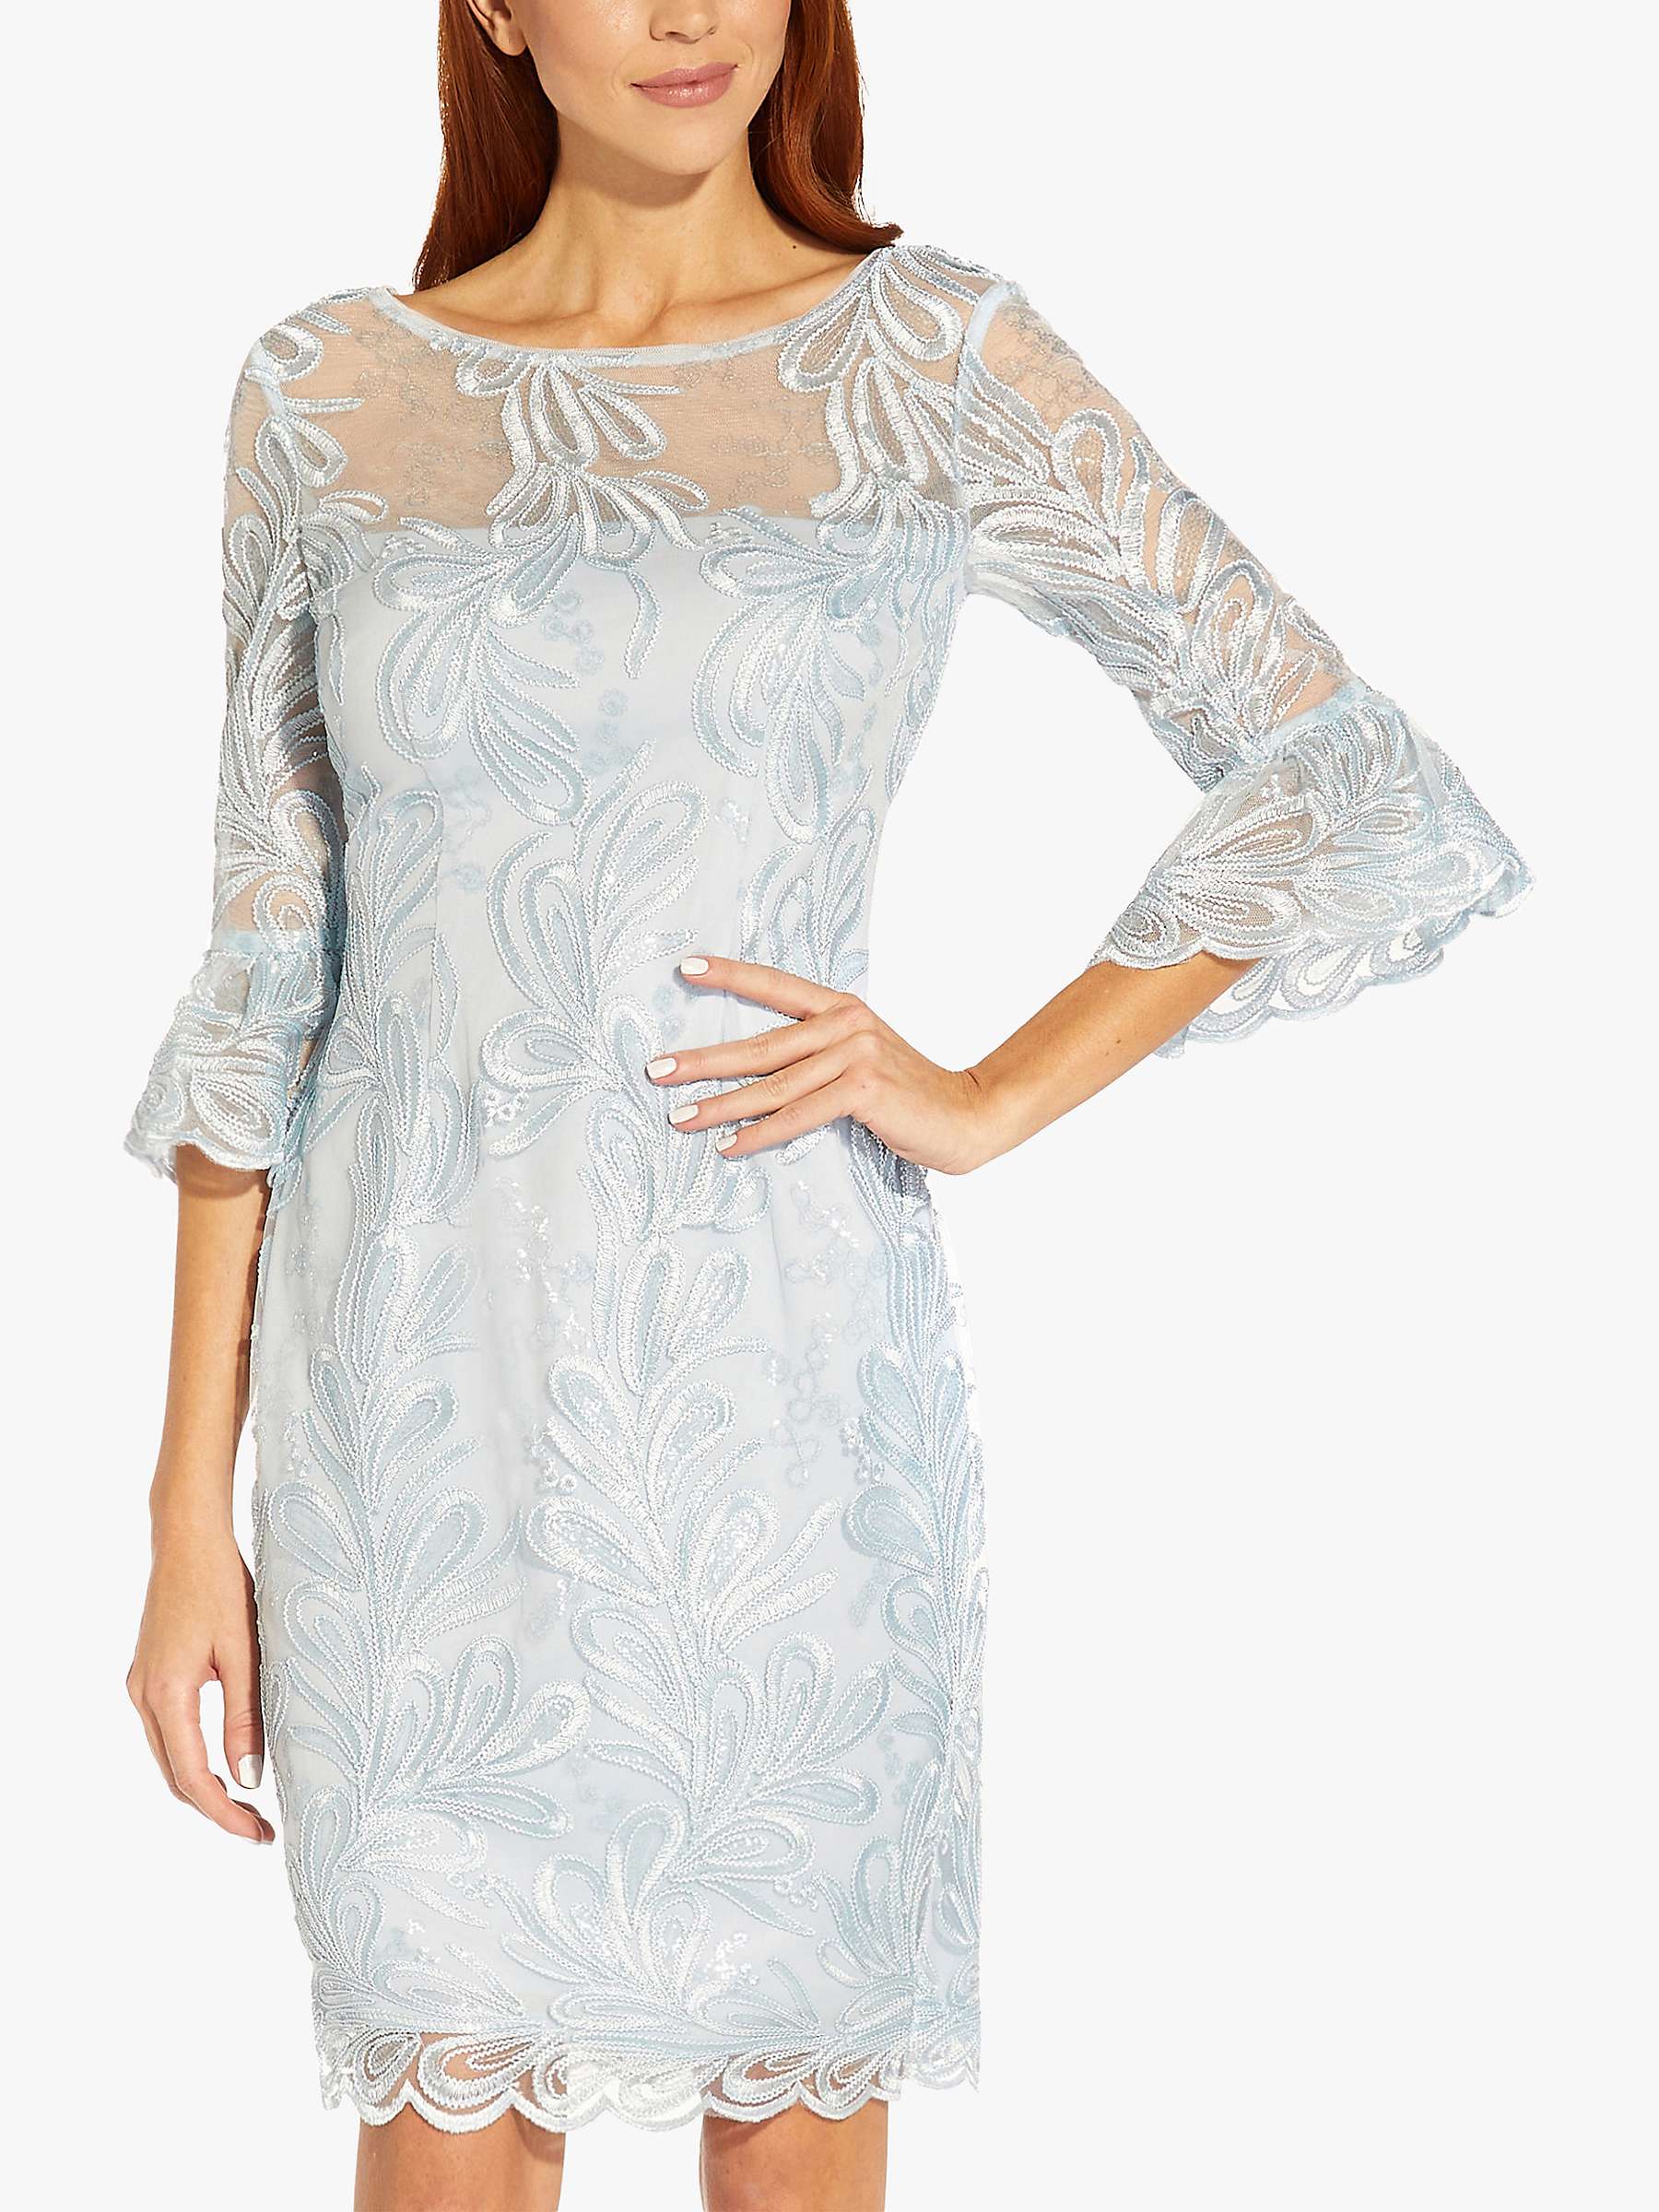 Buy Adrianna Papell Embroidered Bell Sleeve Sheath Dress, Opal Online at johnlewis.com